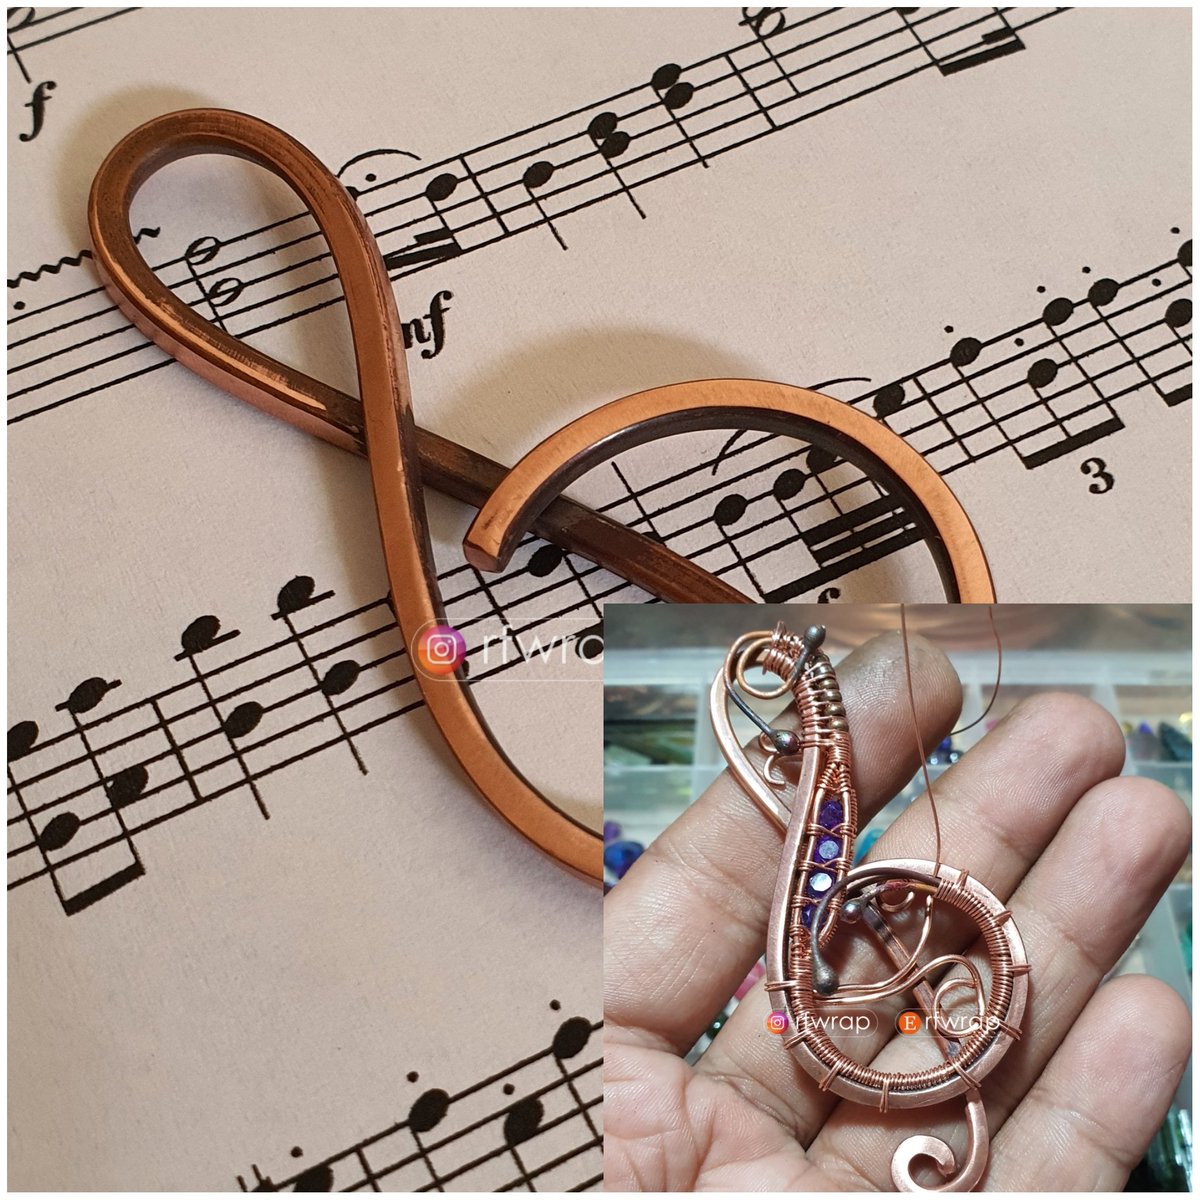 today I tried to make a music note, using a rather large square wire, I'm still confused what stone is suitable, do you guys have any ideas?
#tutorial #freetutorial #wirewraptutorial #copper #jewelrytutorial #tutorialshort #wirewrapping